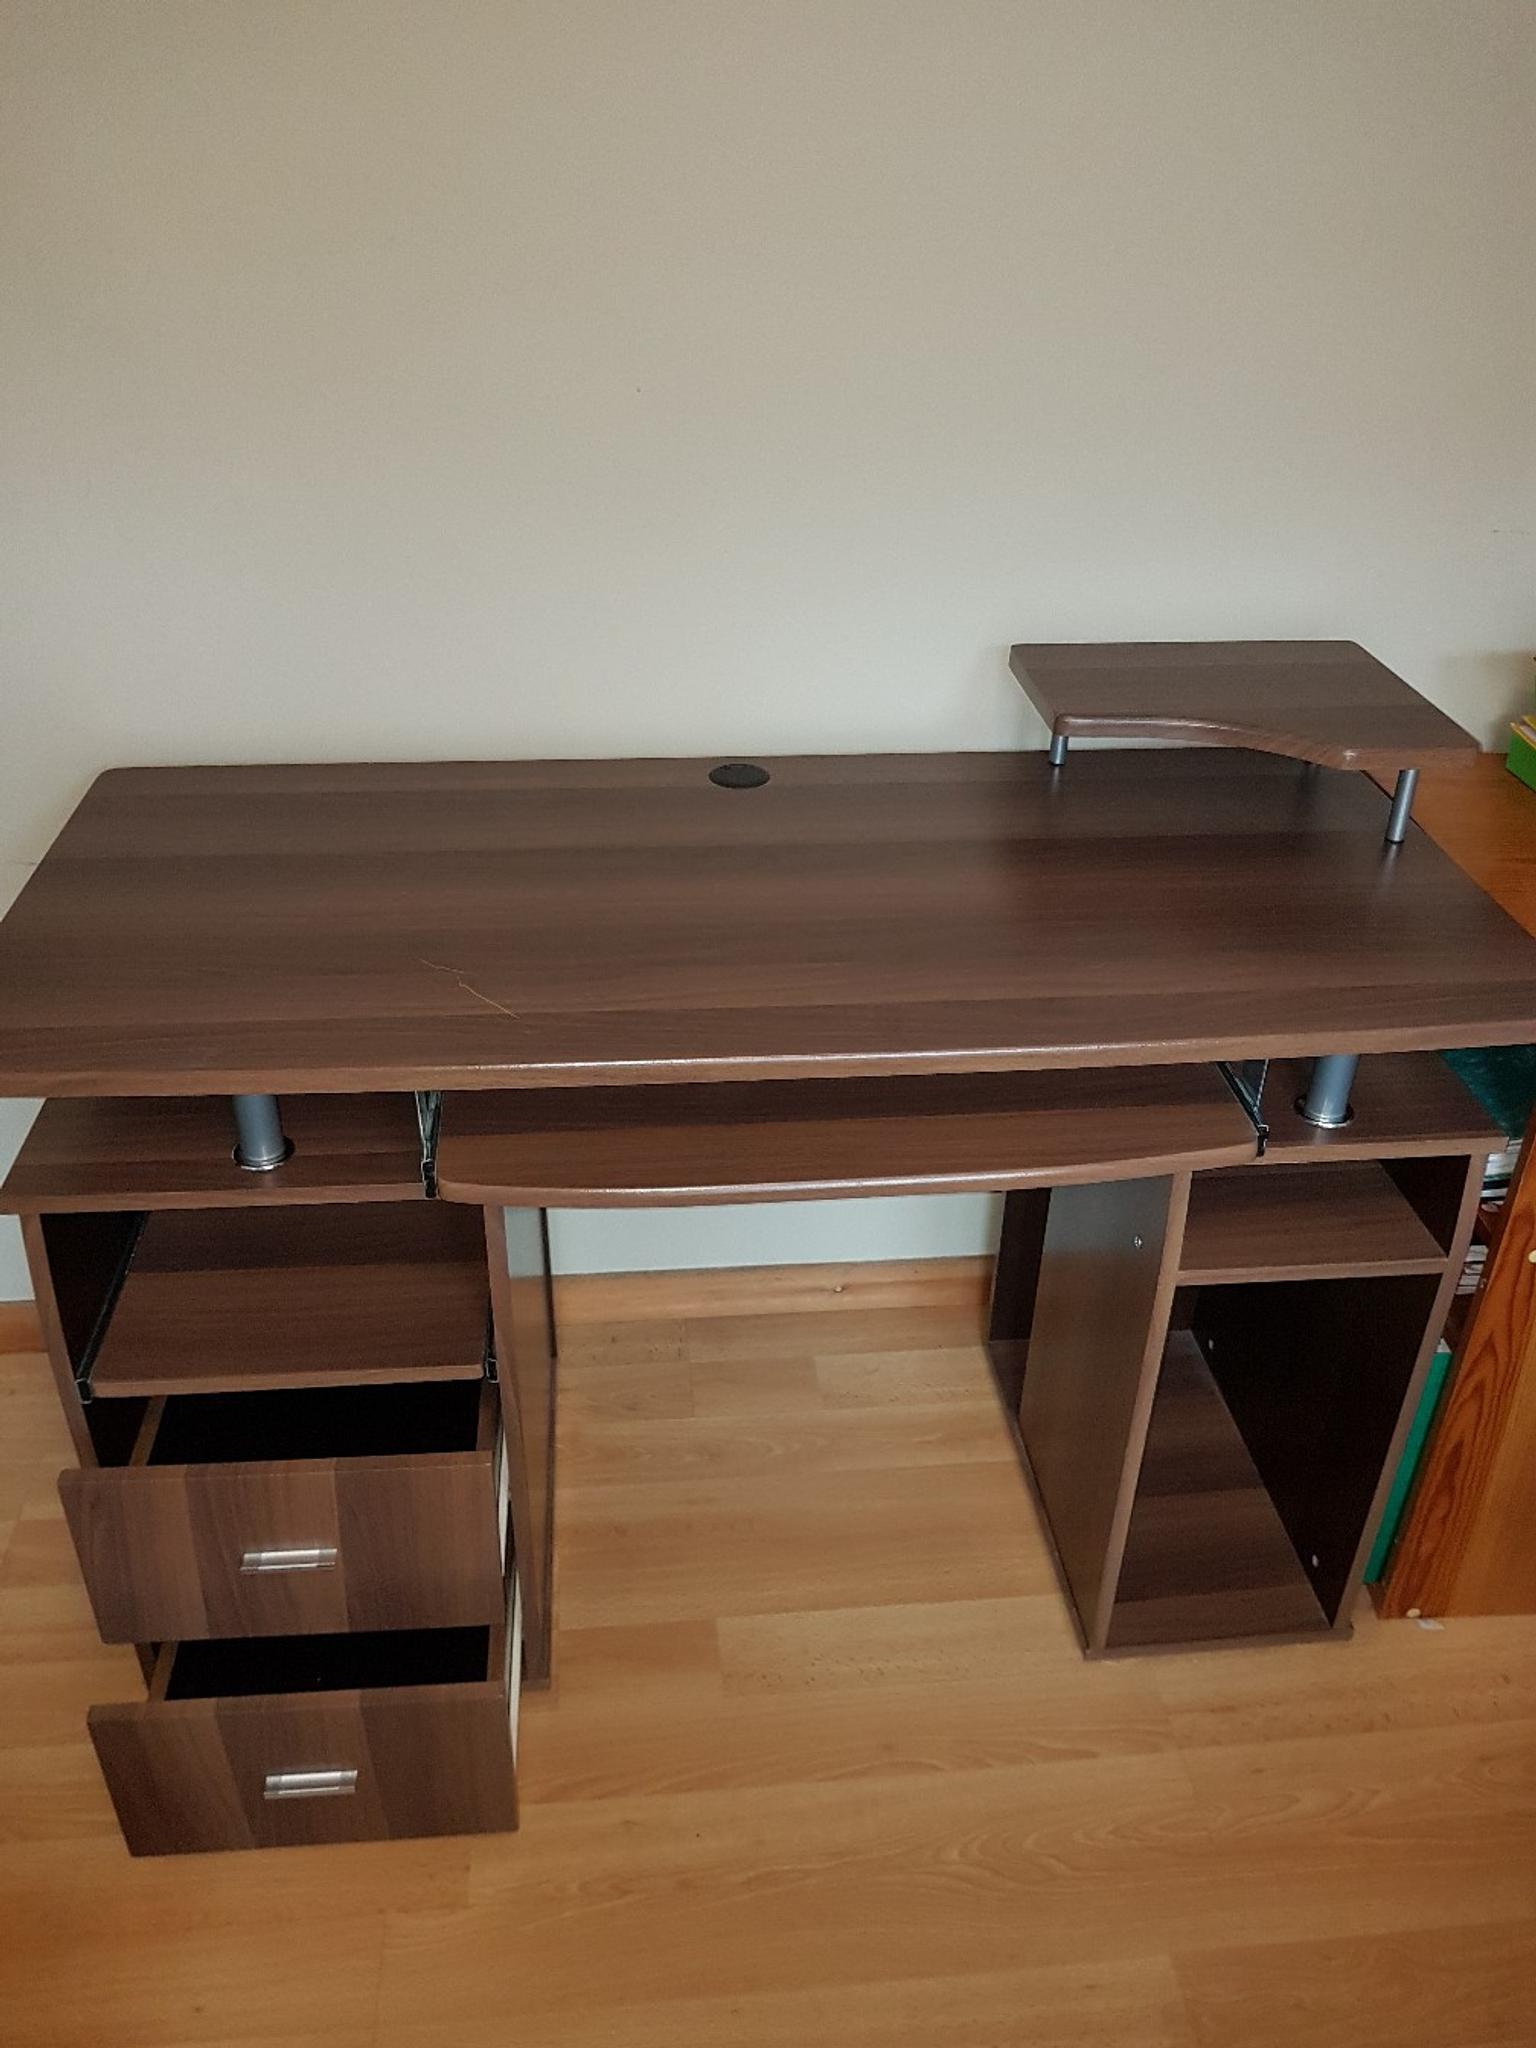 Mahogany Style Office Desk In Ba2 Bath For 15 00 For Sale Shpock